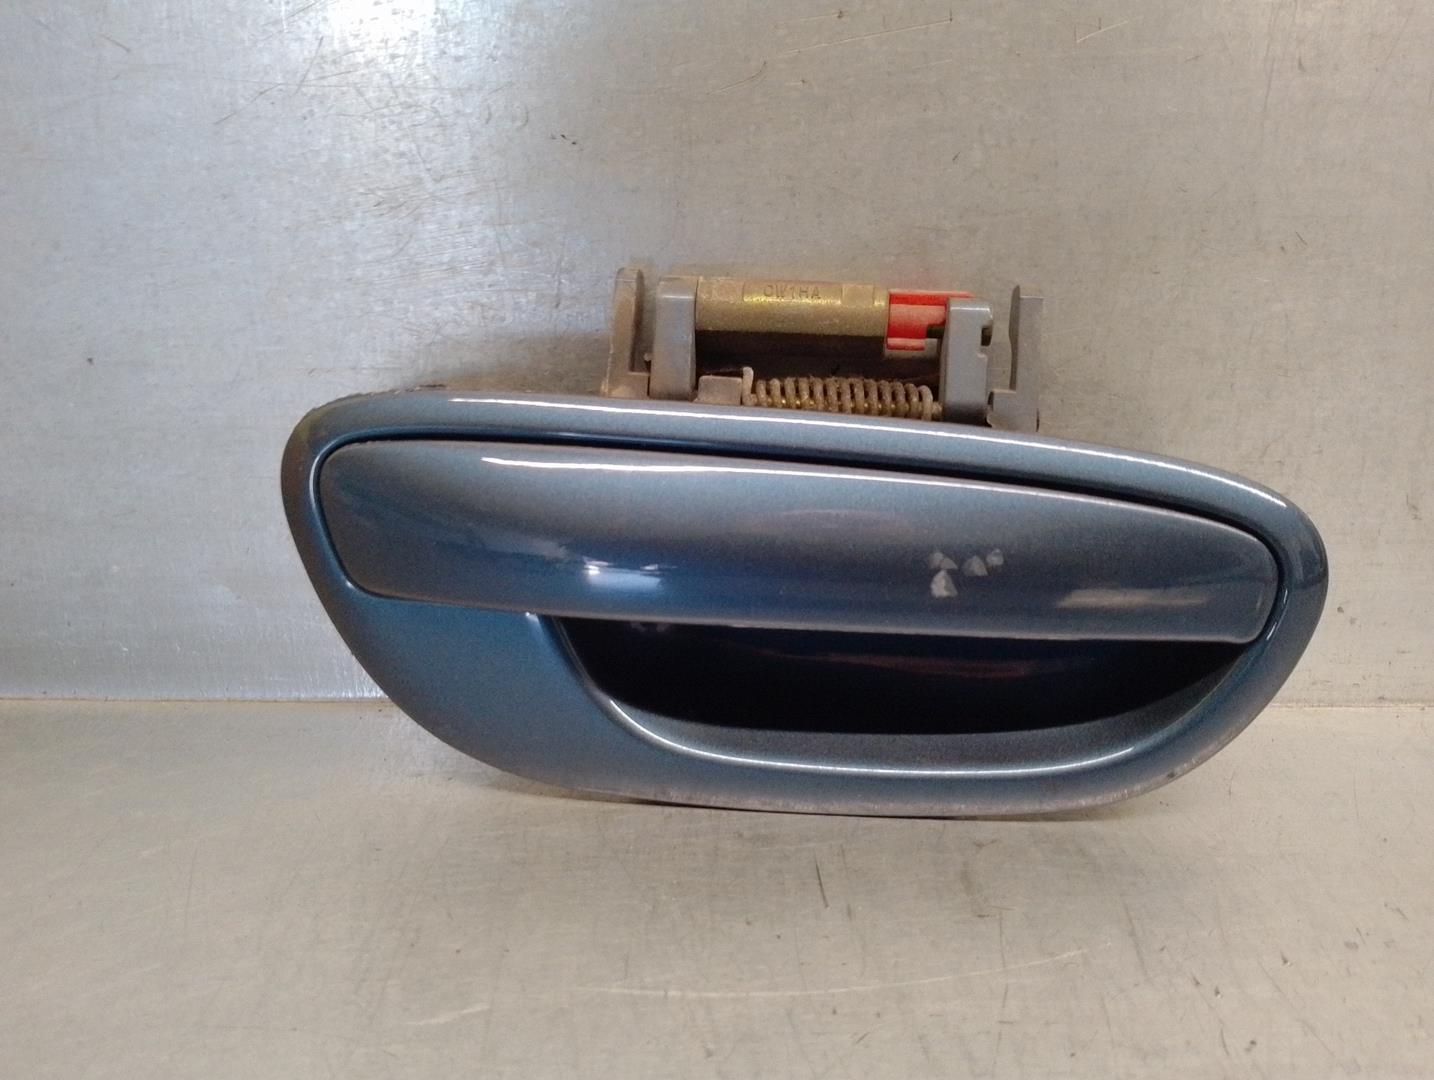 SUBARU Outback 3 generation (2003-2009) Rear right door outer handle 61022AG000BE, 5PUERTAS 24141450